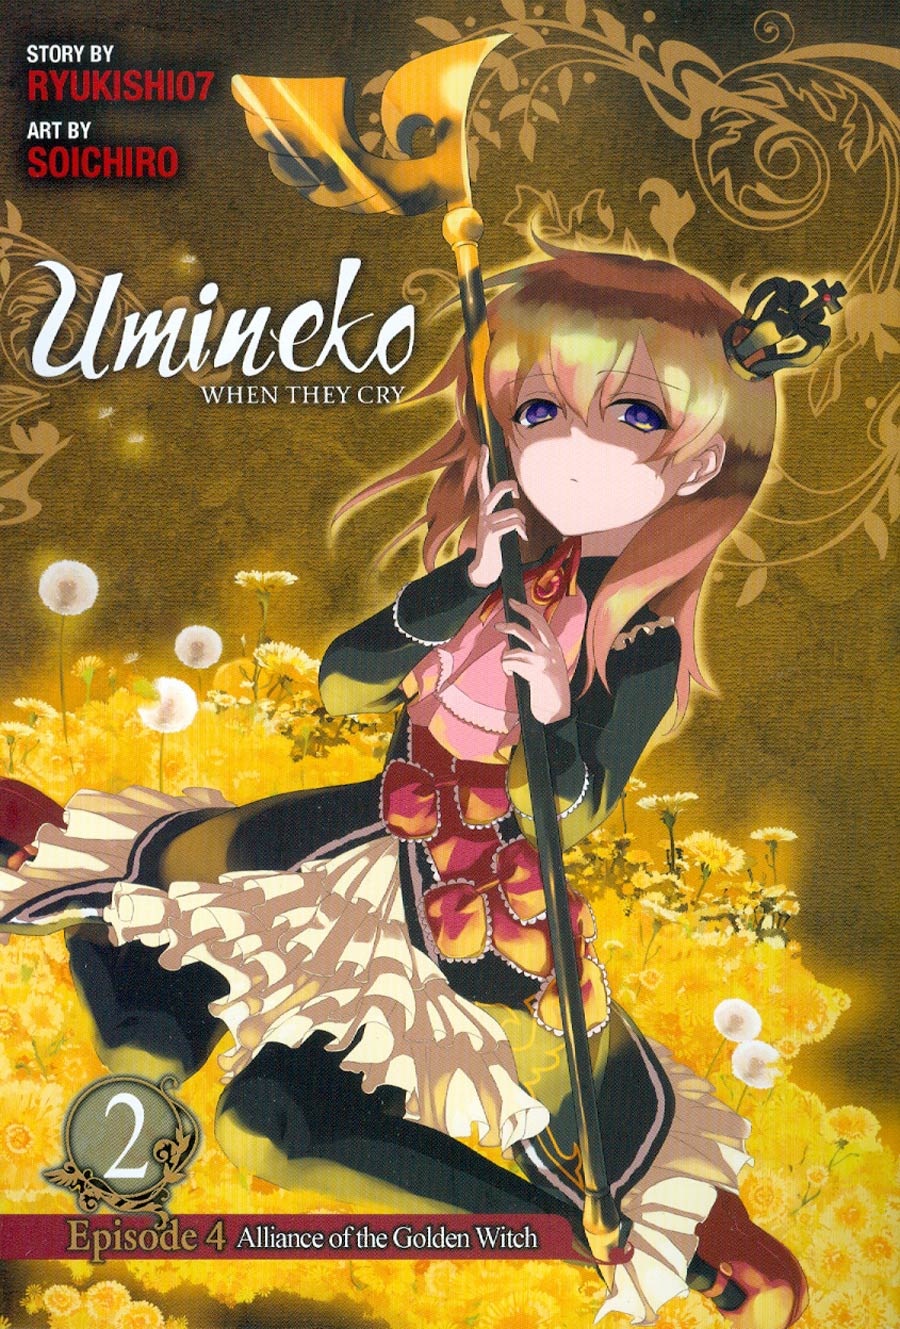 Umineko When They Cry Vol 8 Episode 4 Alliance Of The Golden Witch Part 2 GN